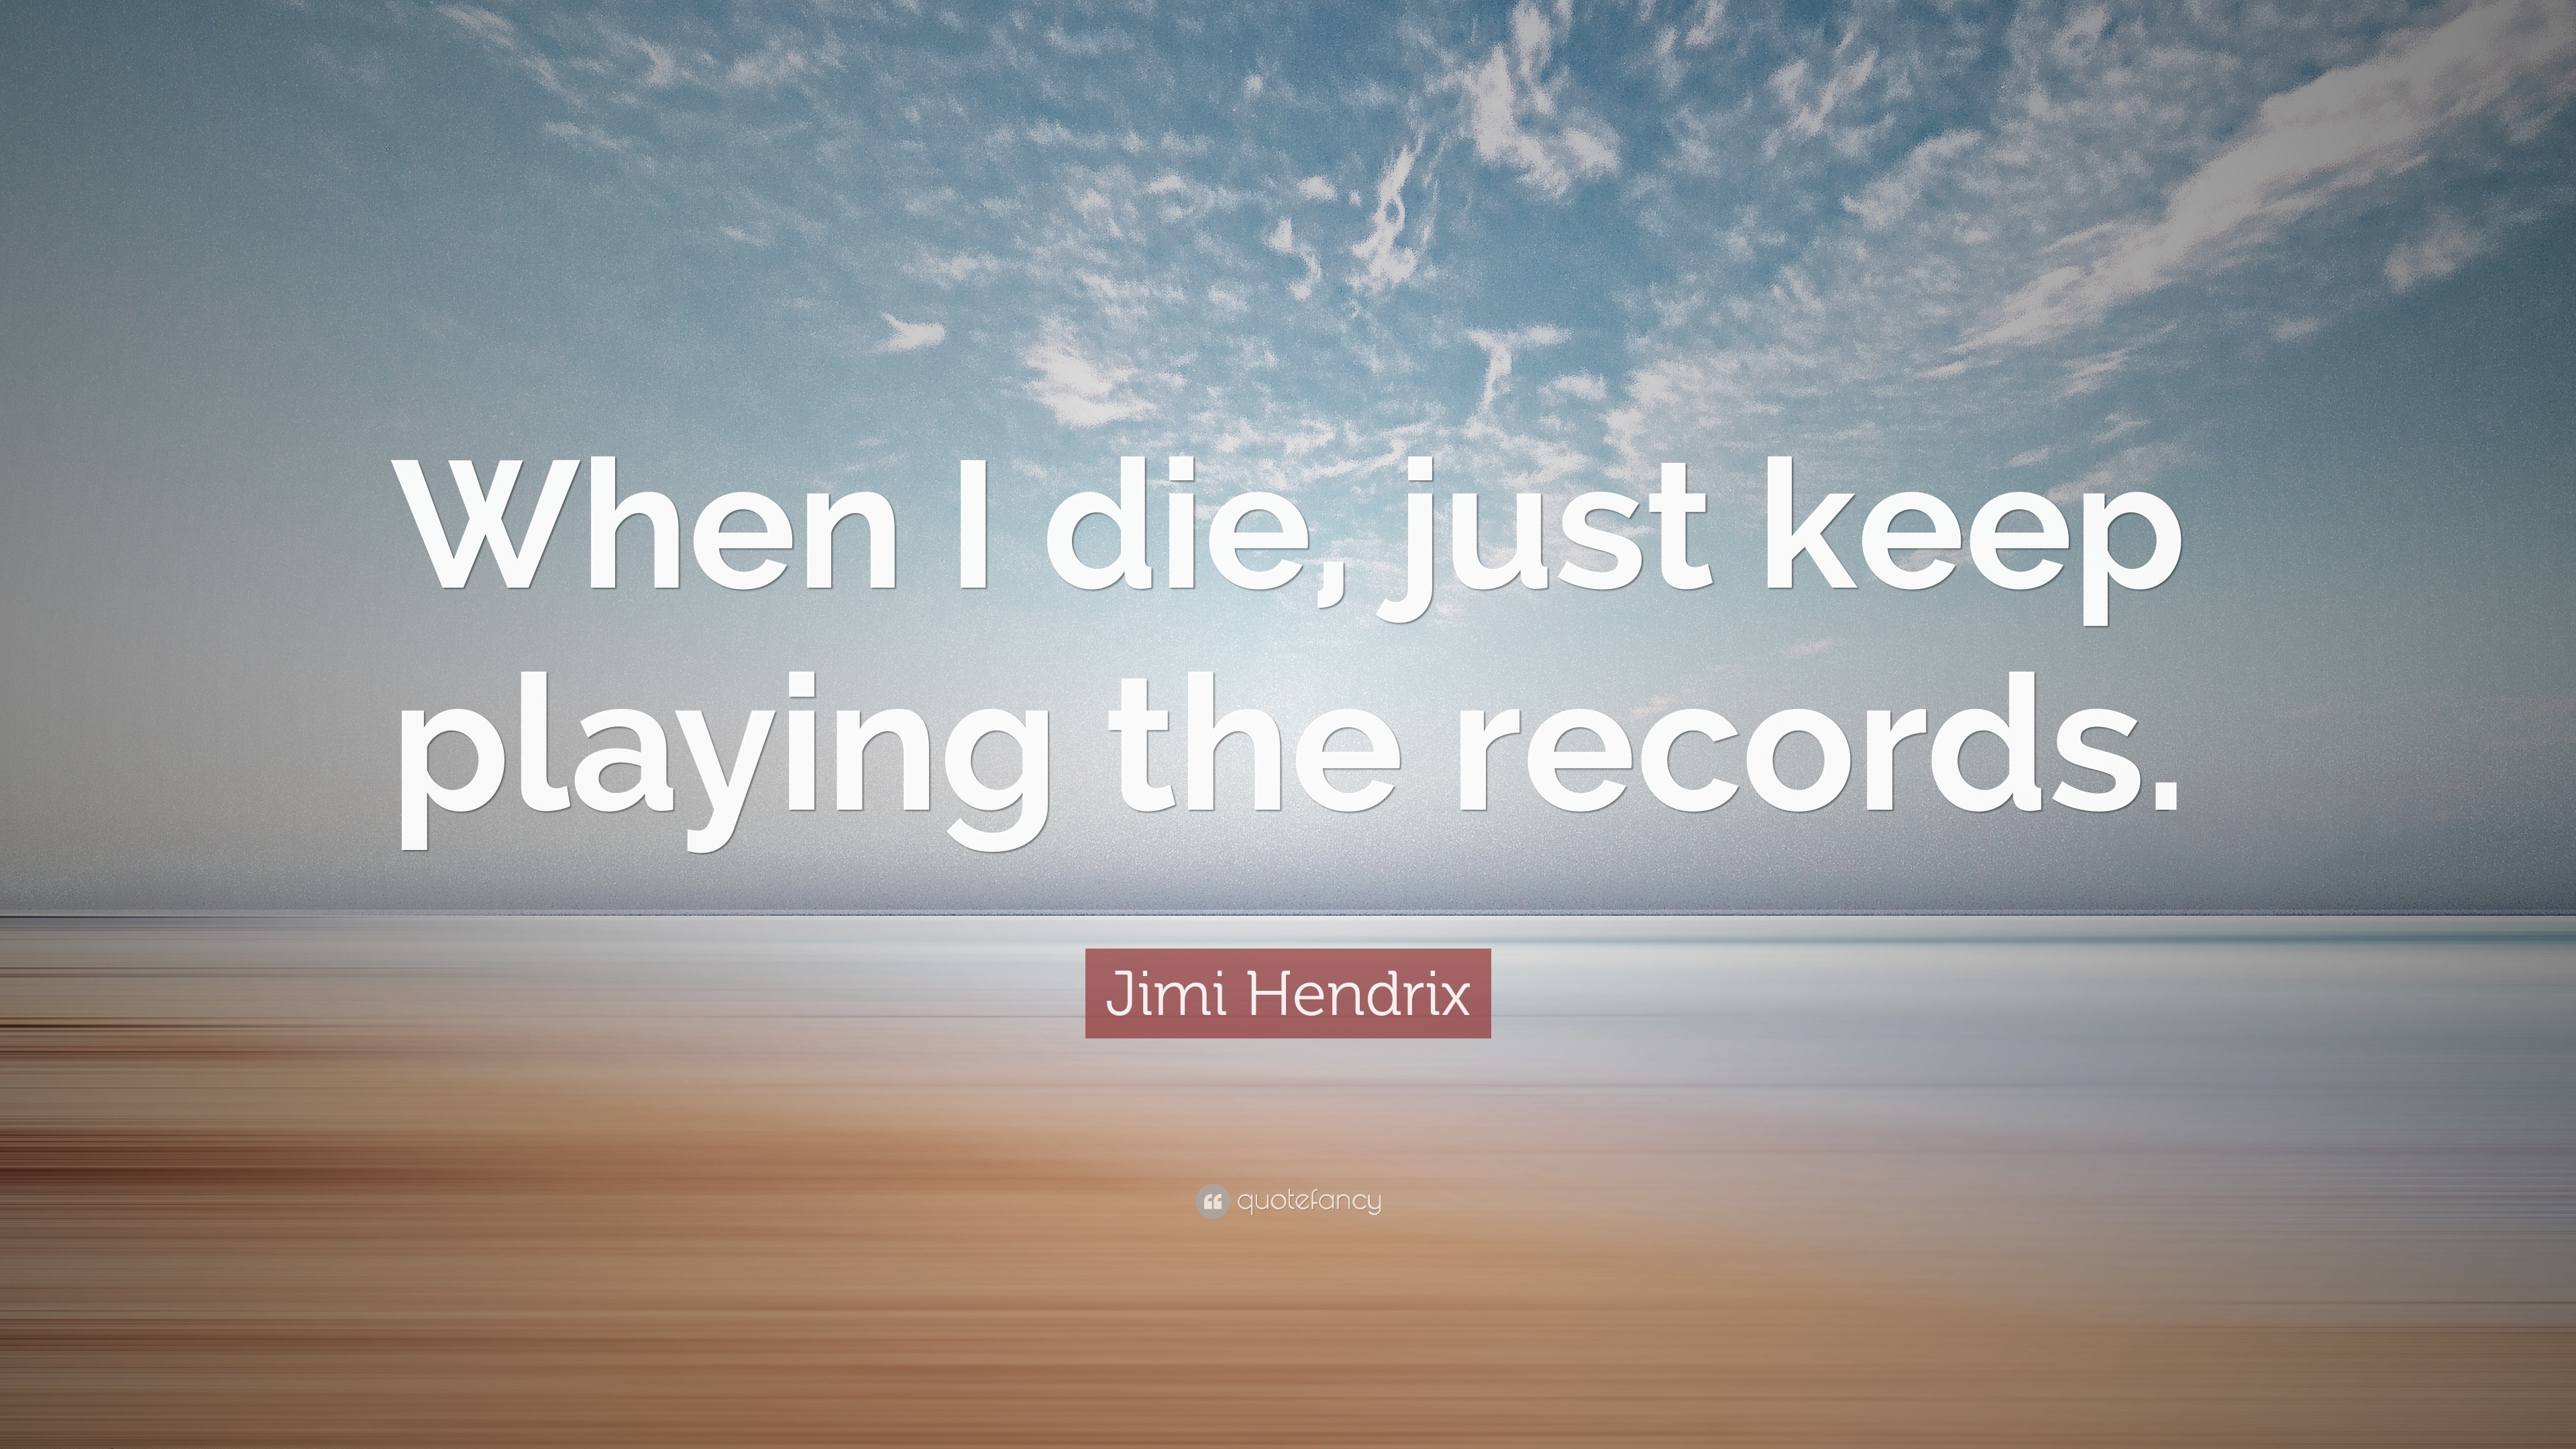 1849286 Jimi Hendrix Quote When I die just keep playing the records